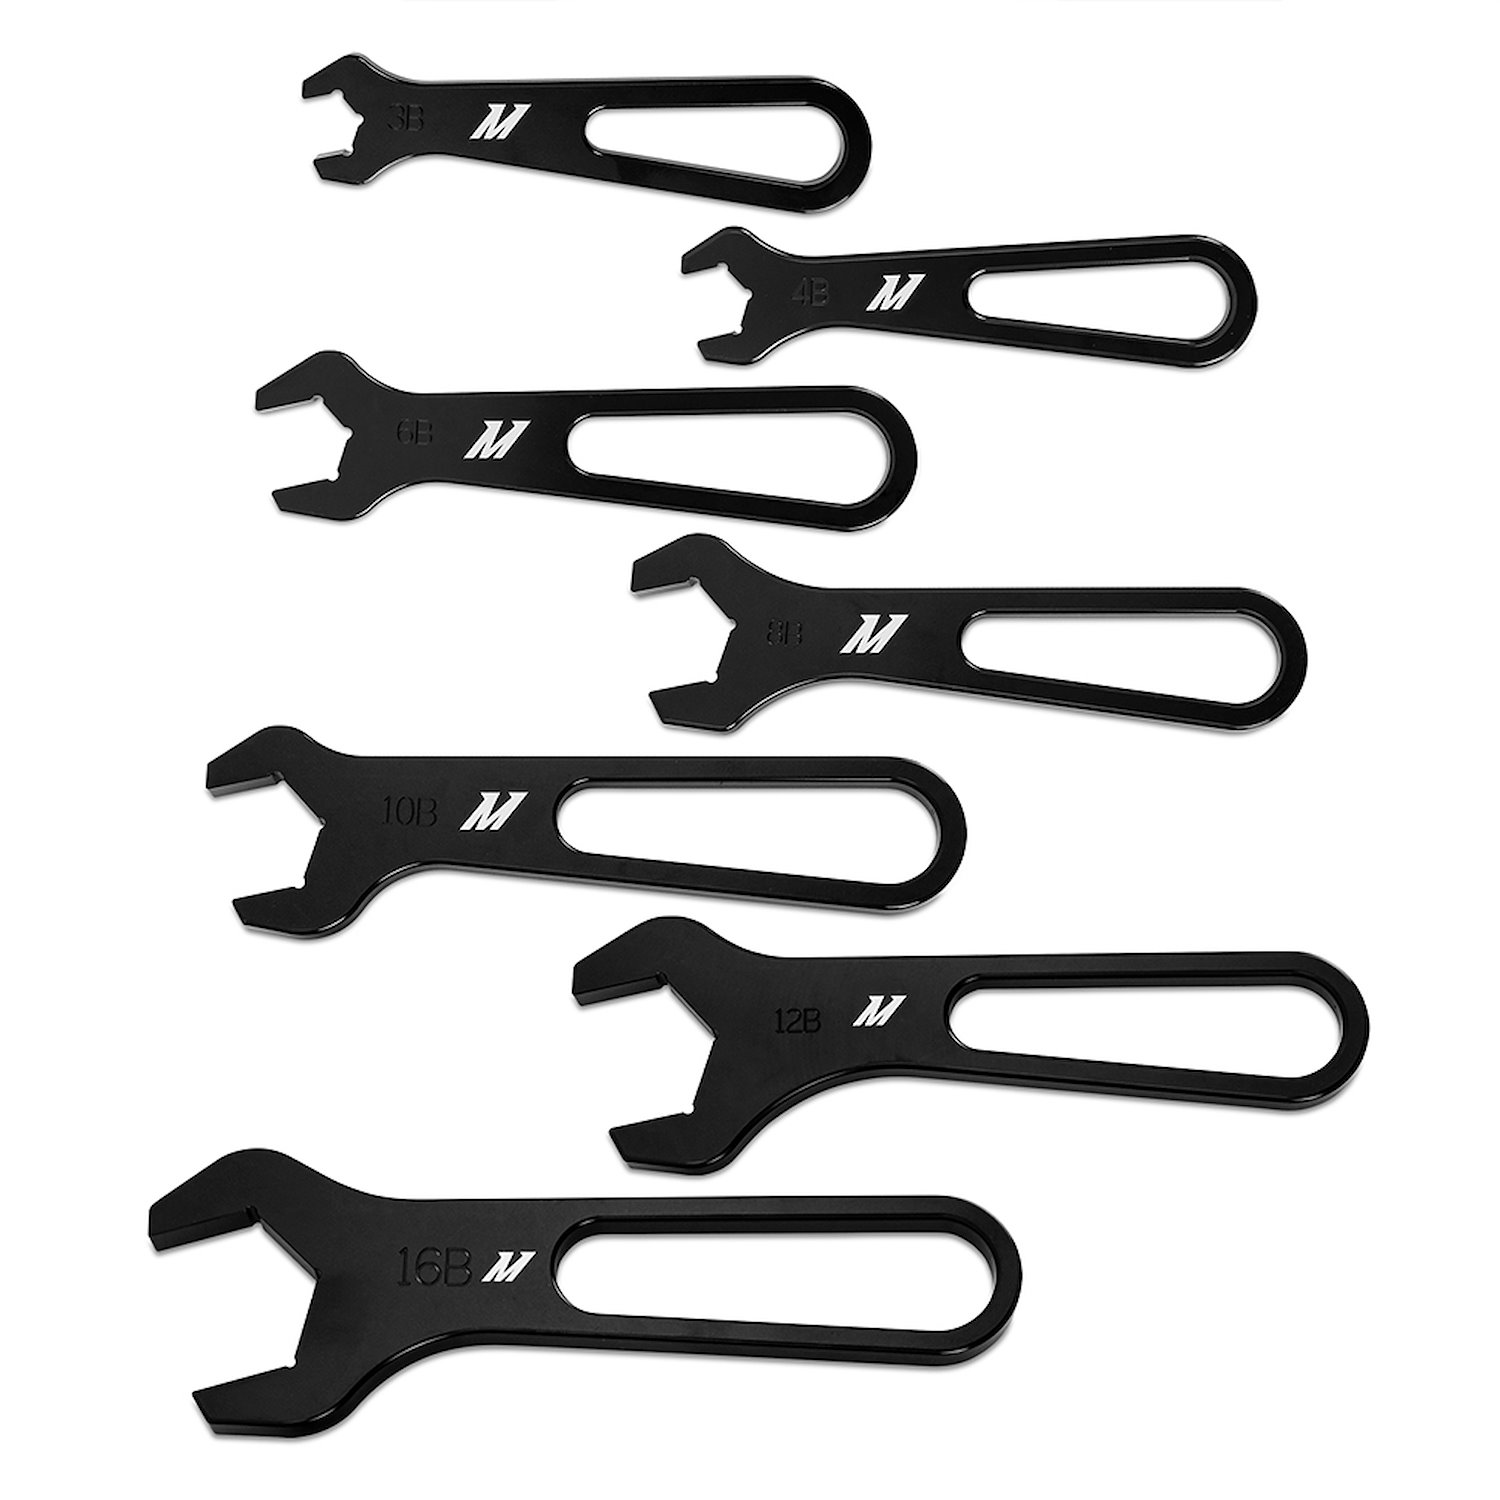 WRENCH SET 7PC.